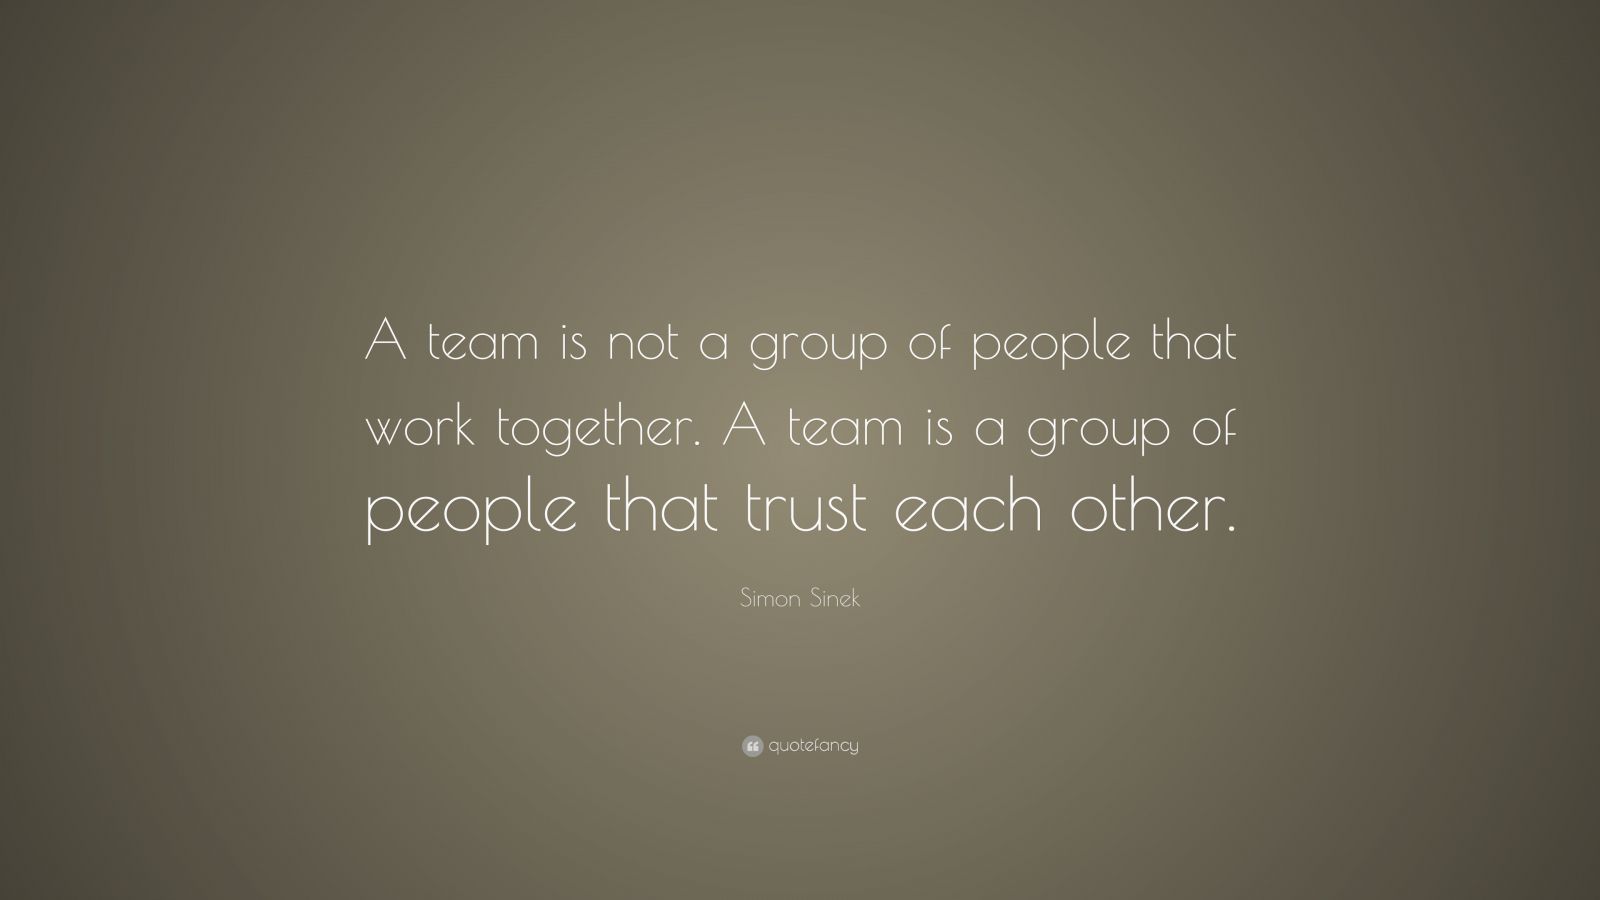 Simon Sinek Quote: “A team is not a group of people that work together ...